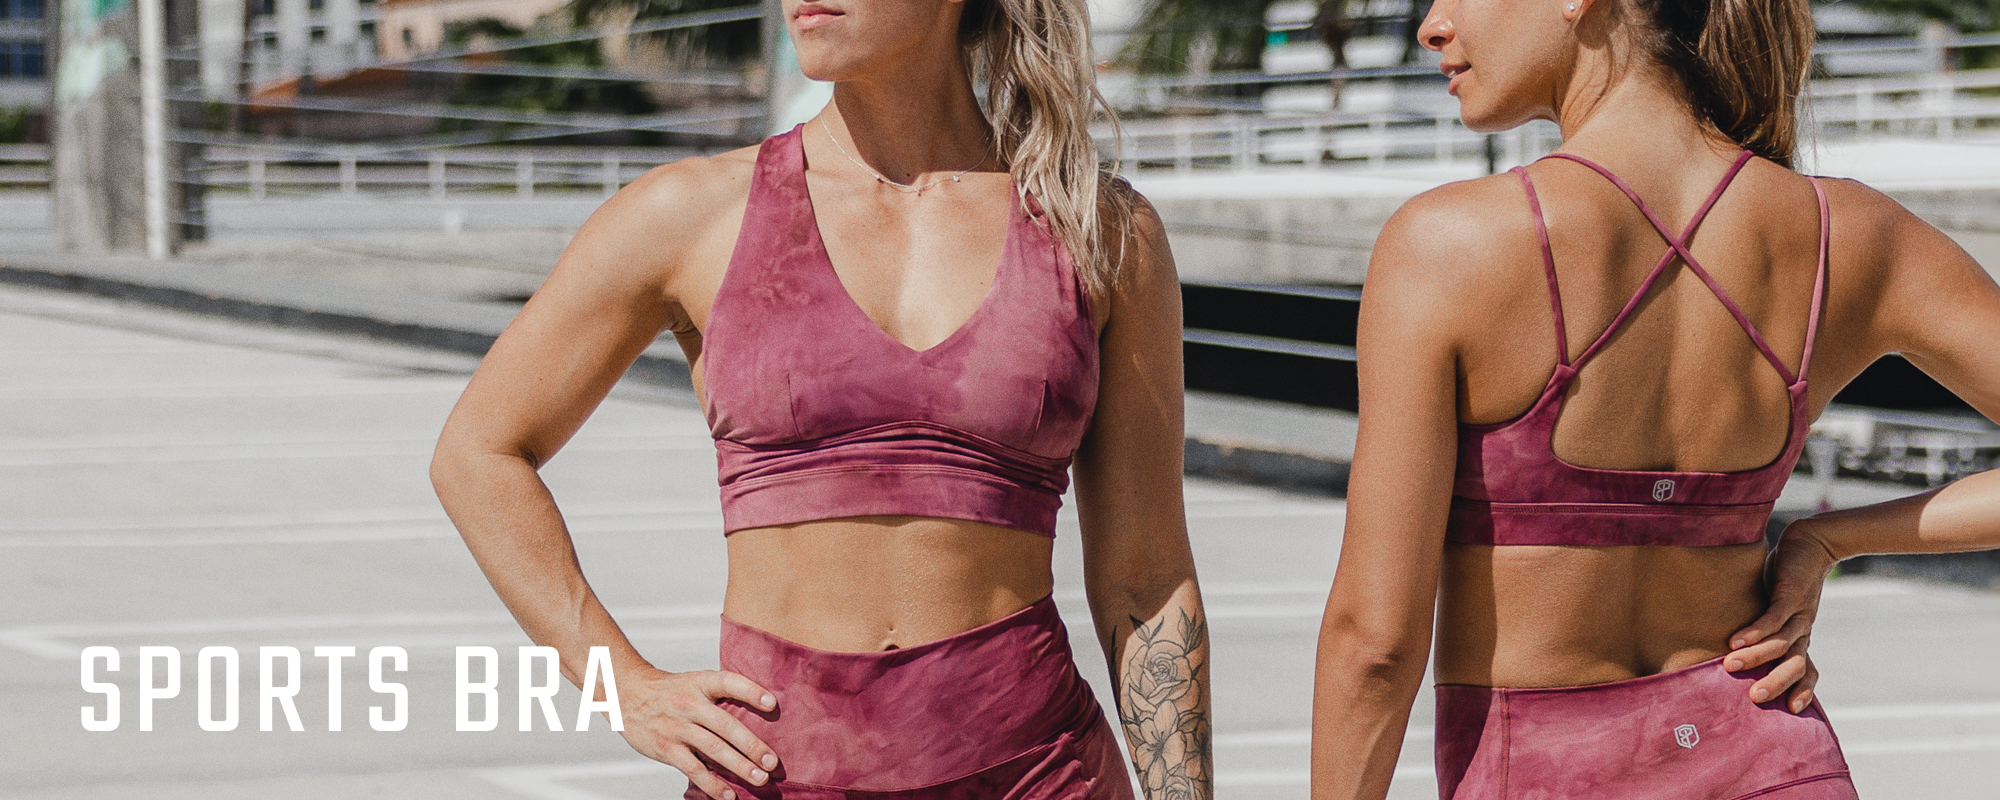 Fabletics Sports Bra Currently Sold Out Rose Pink - $26 (56% Off